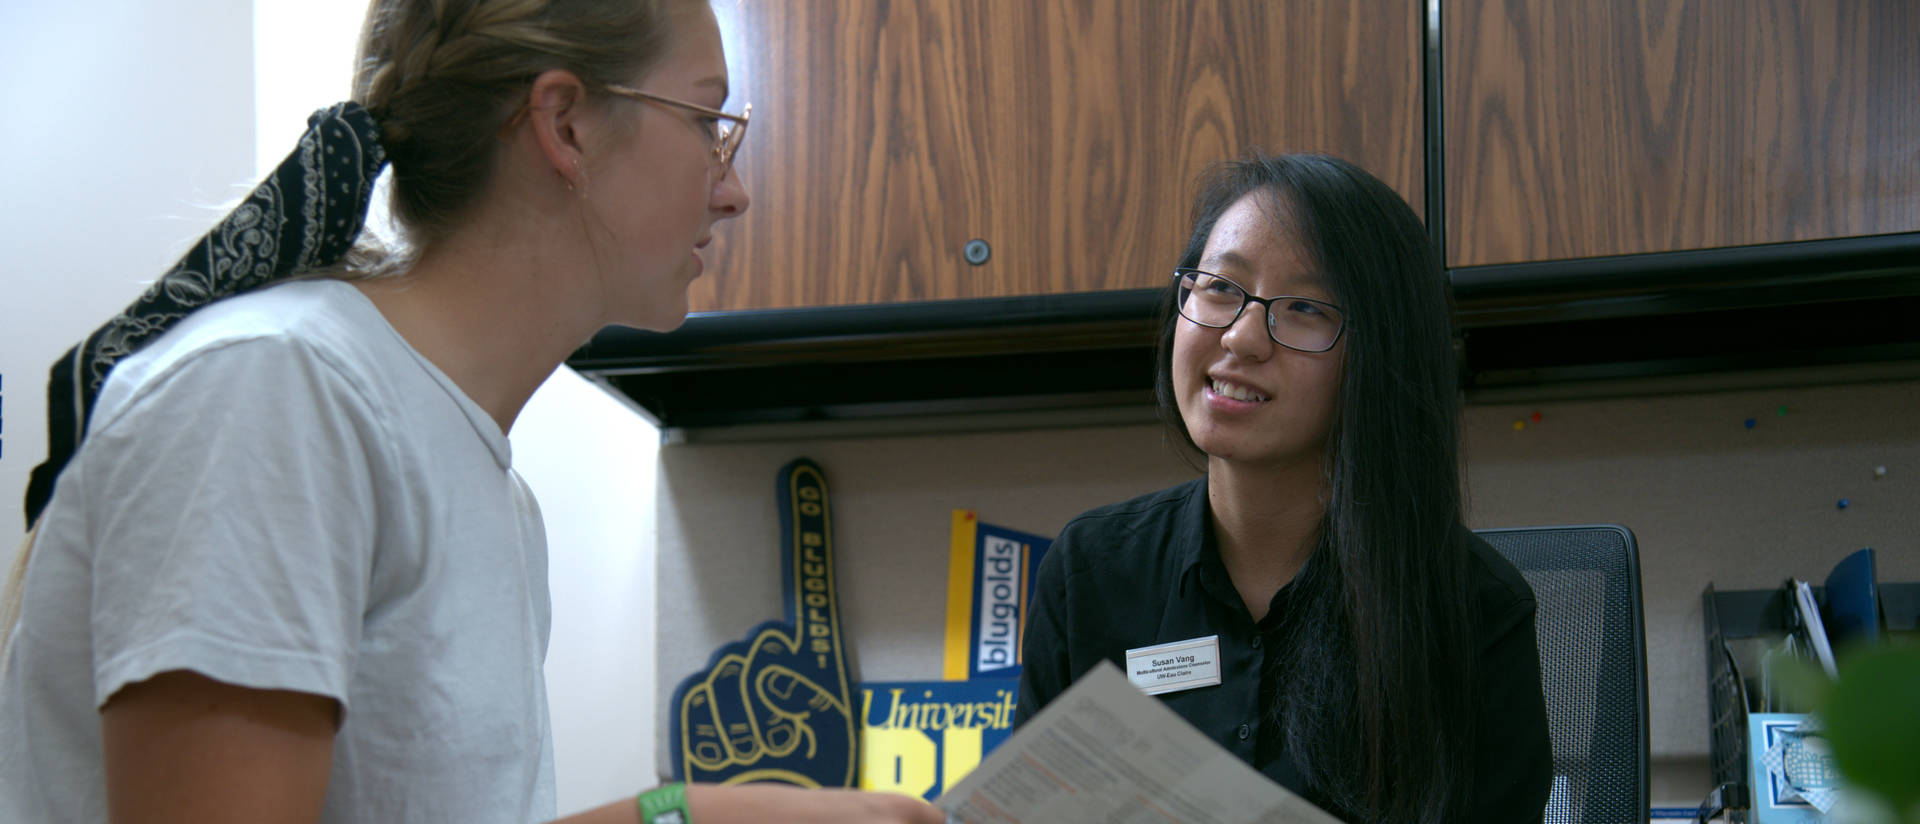 Female counselor advising a student